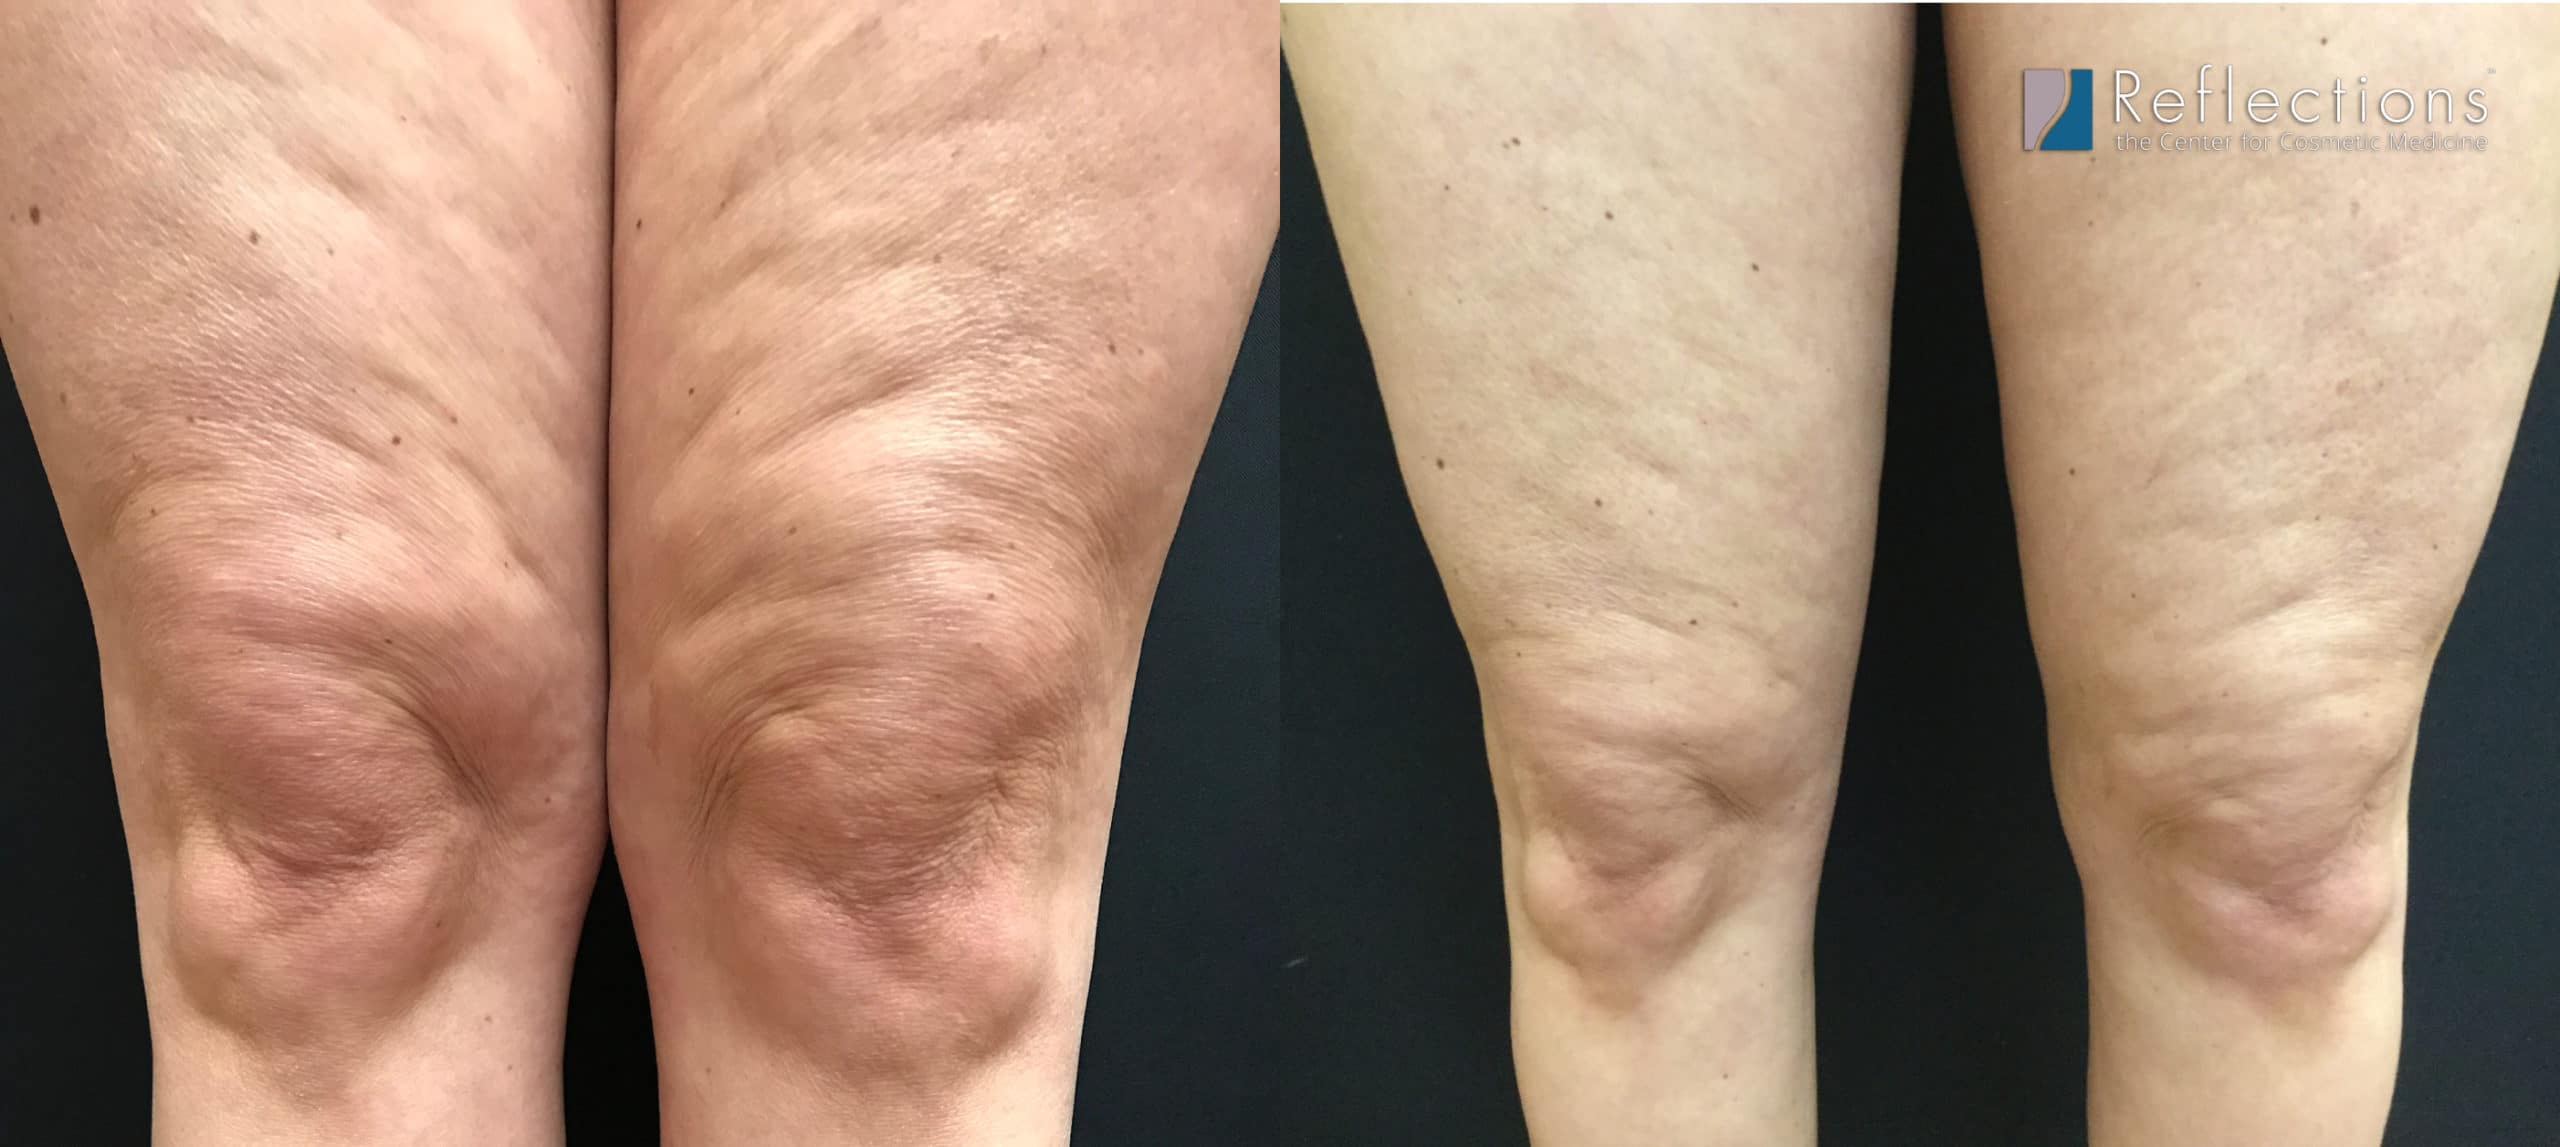 Laser Lipo for Knee Fat Plus Exilis for Thigh Skin Tightening Results ...